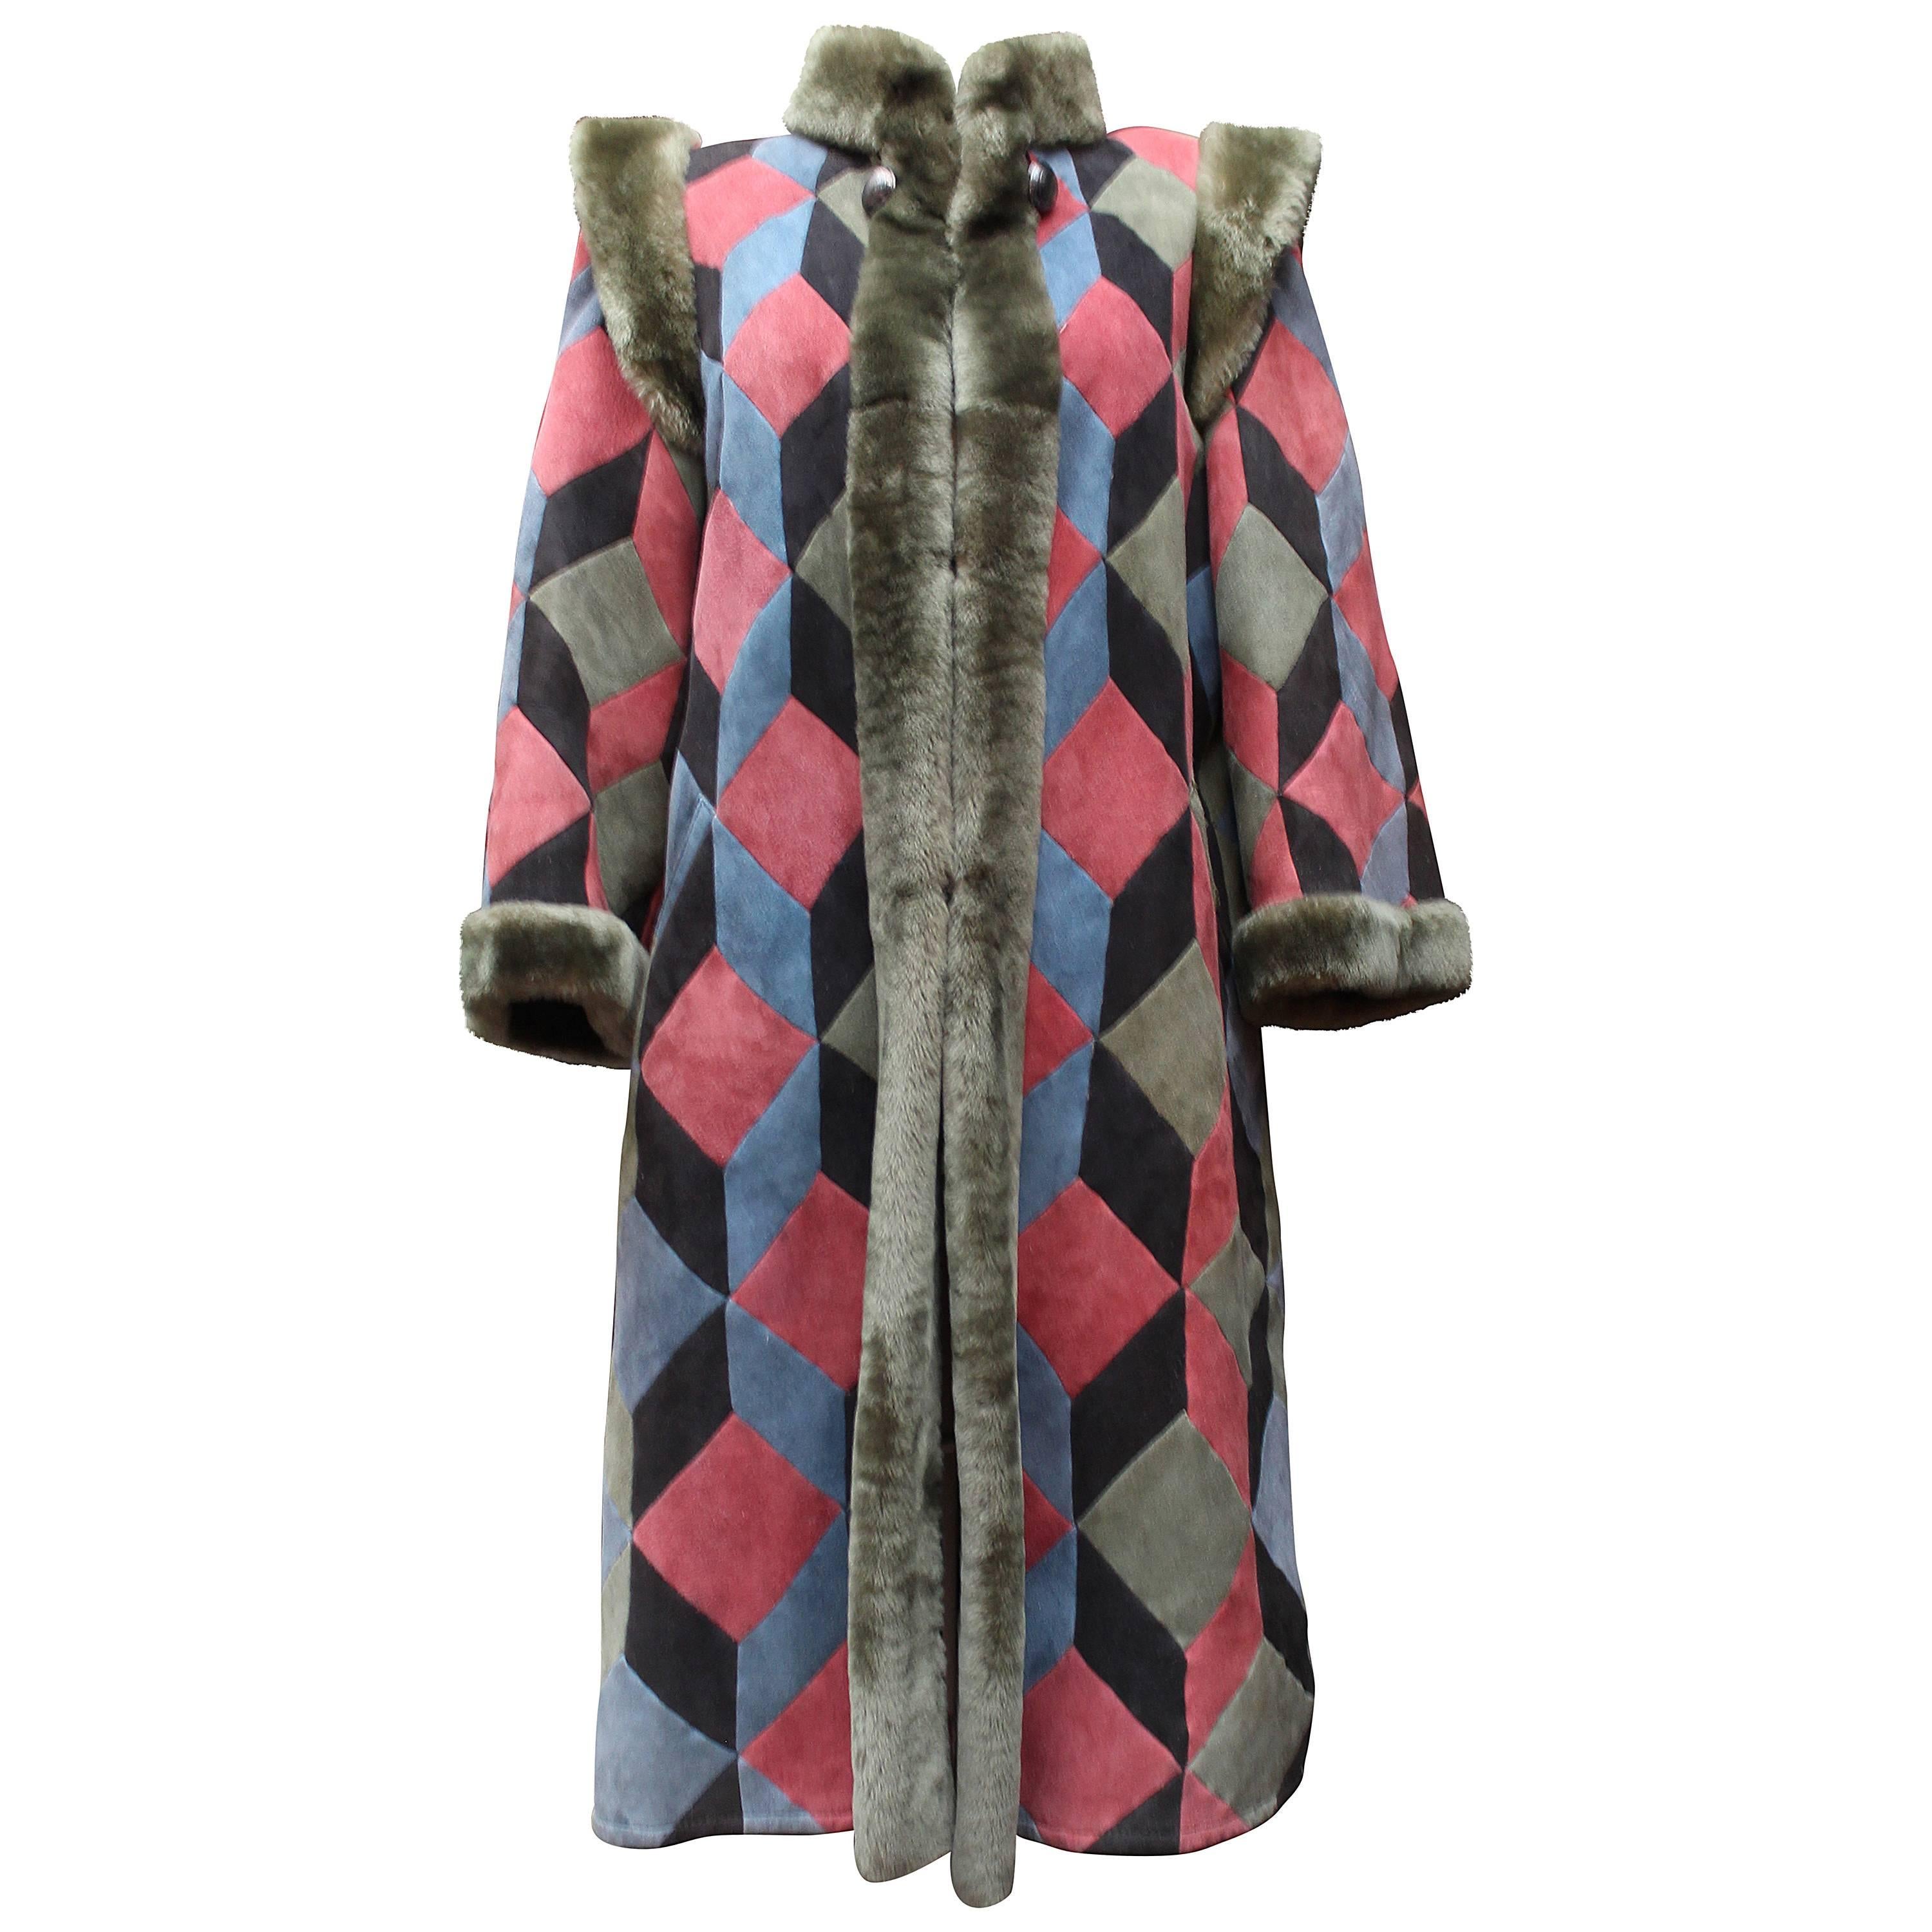 1975s Christian Dior Multicolored Patchwork Shearling Coat